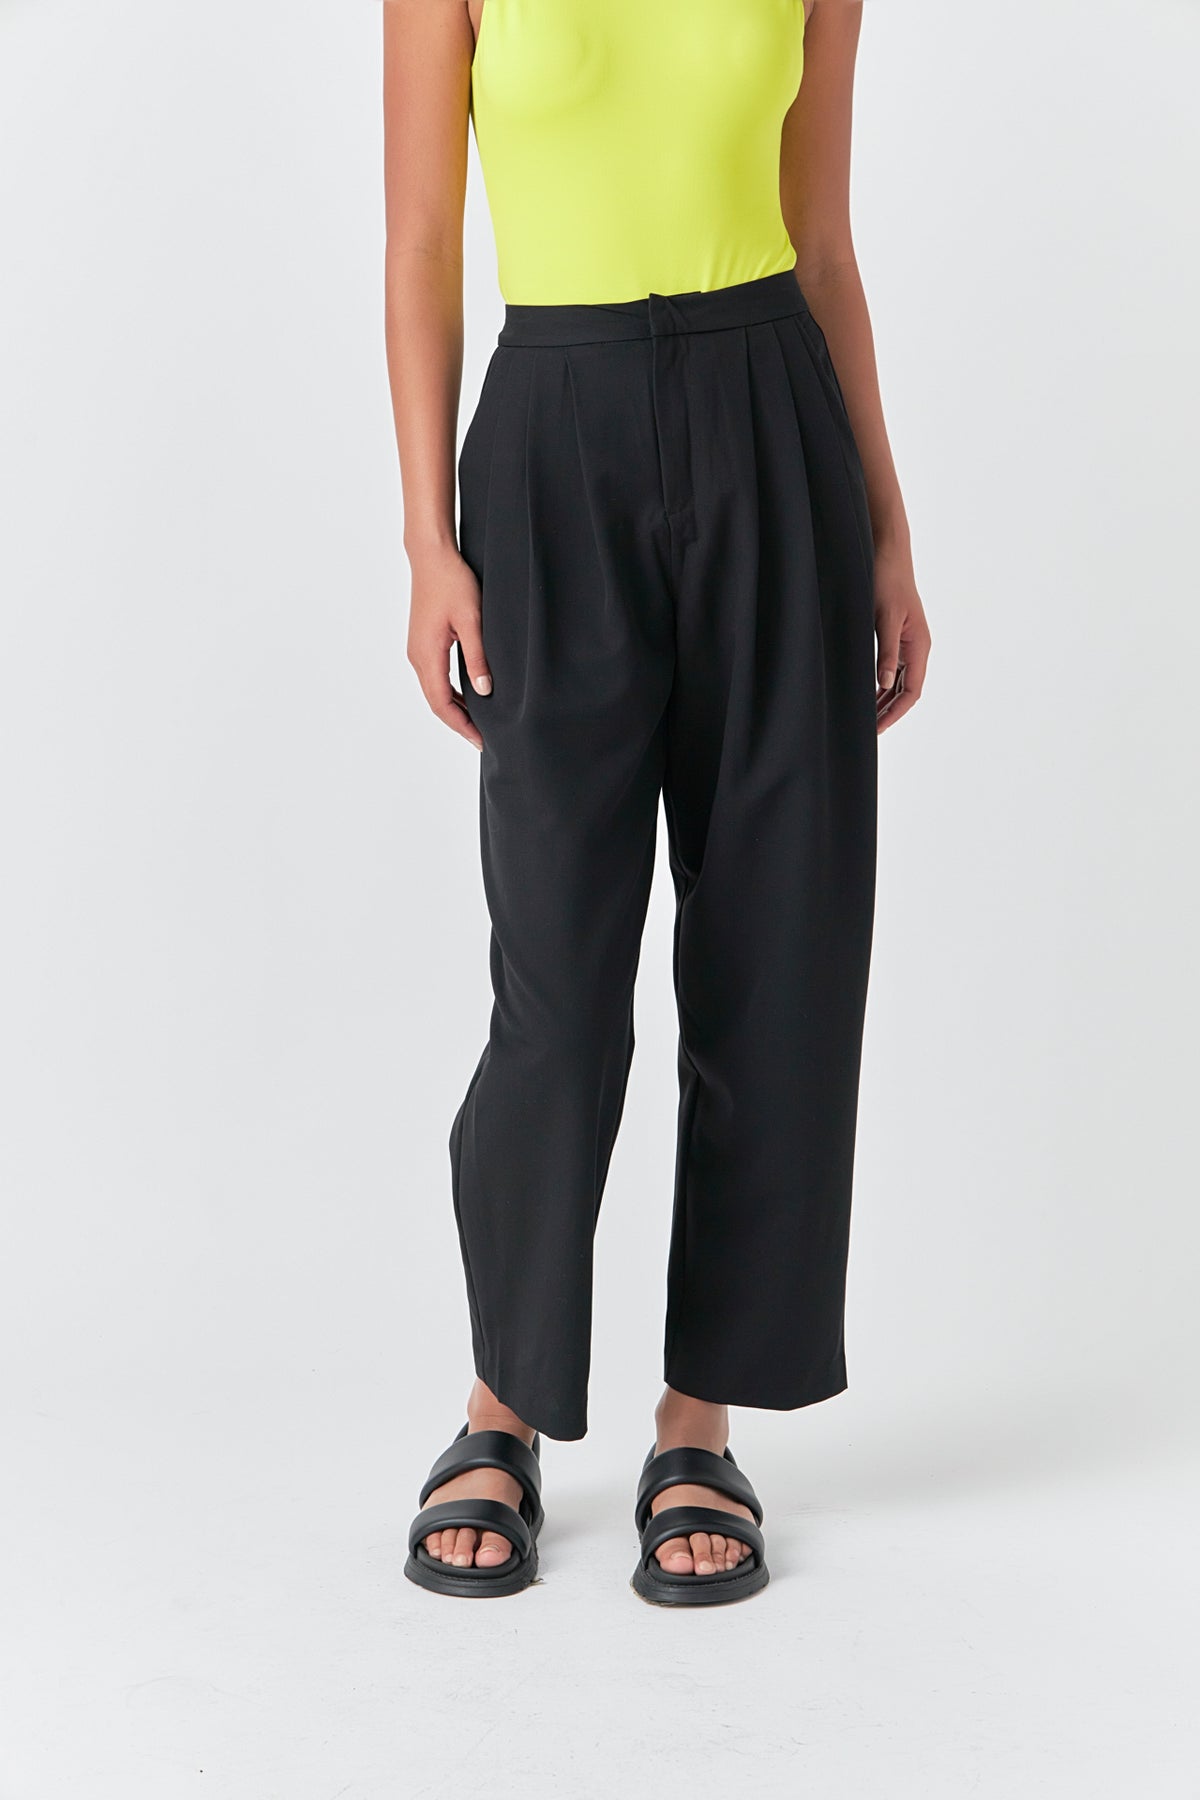 GREY LAB - High Waist Balloon Trousers - PANTS available at Objectrare